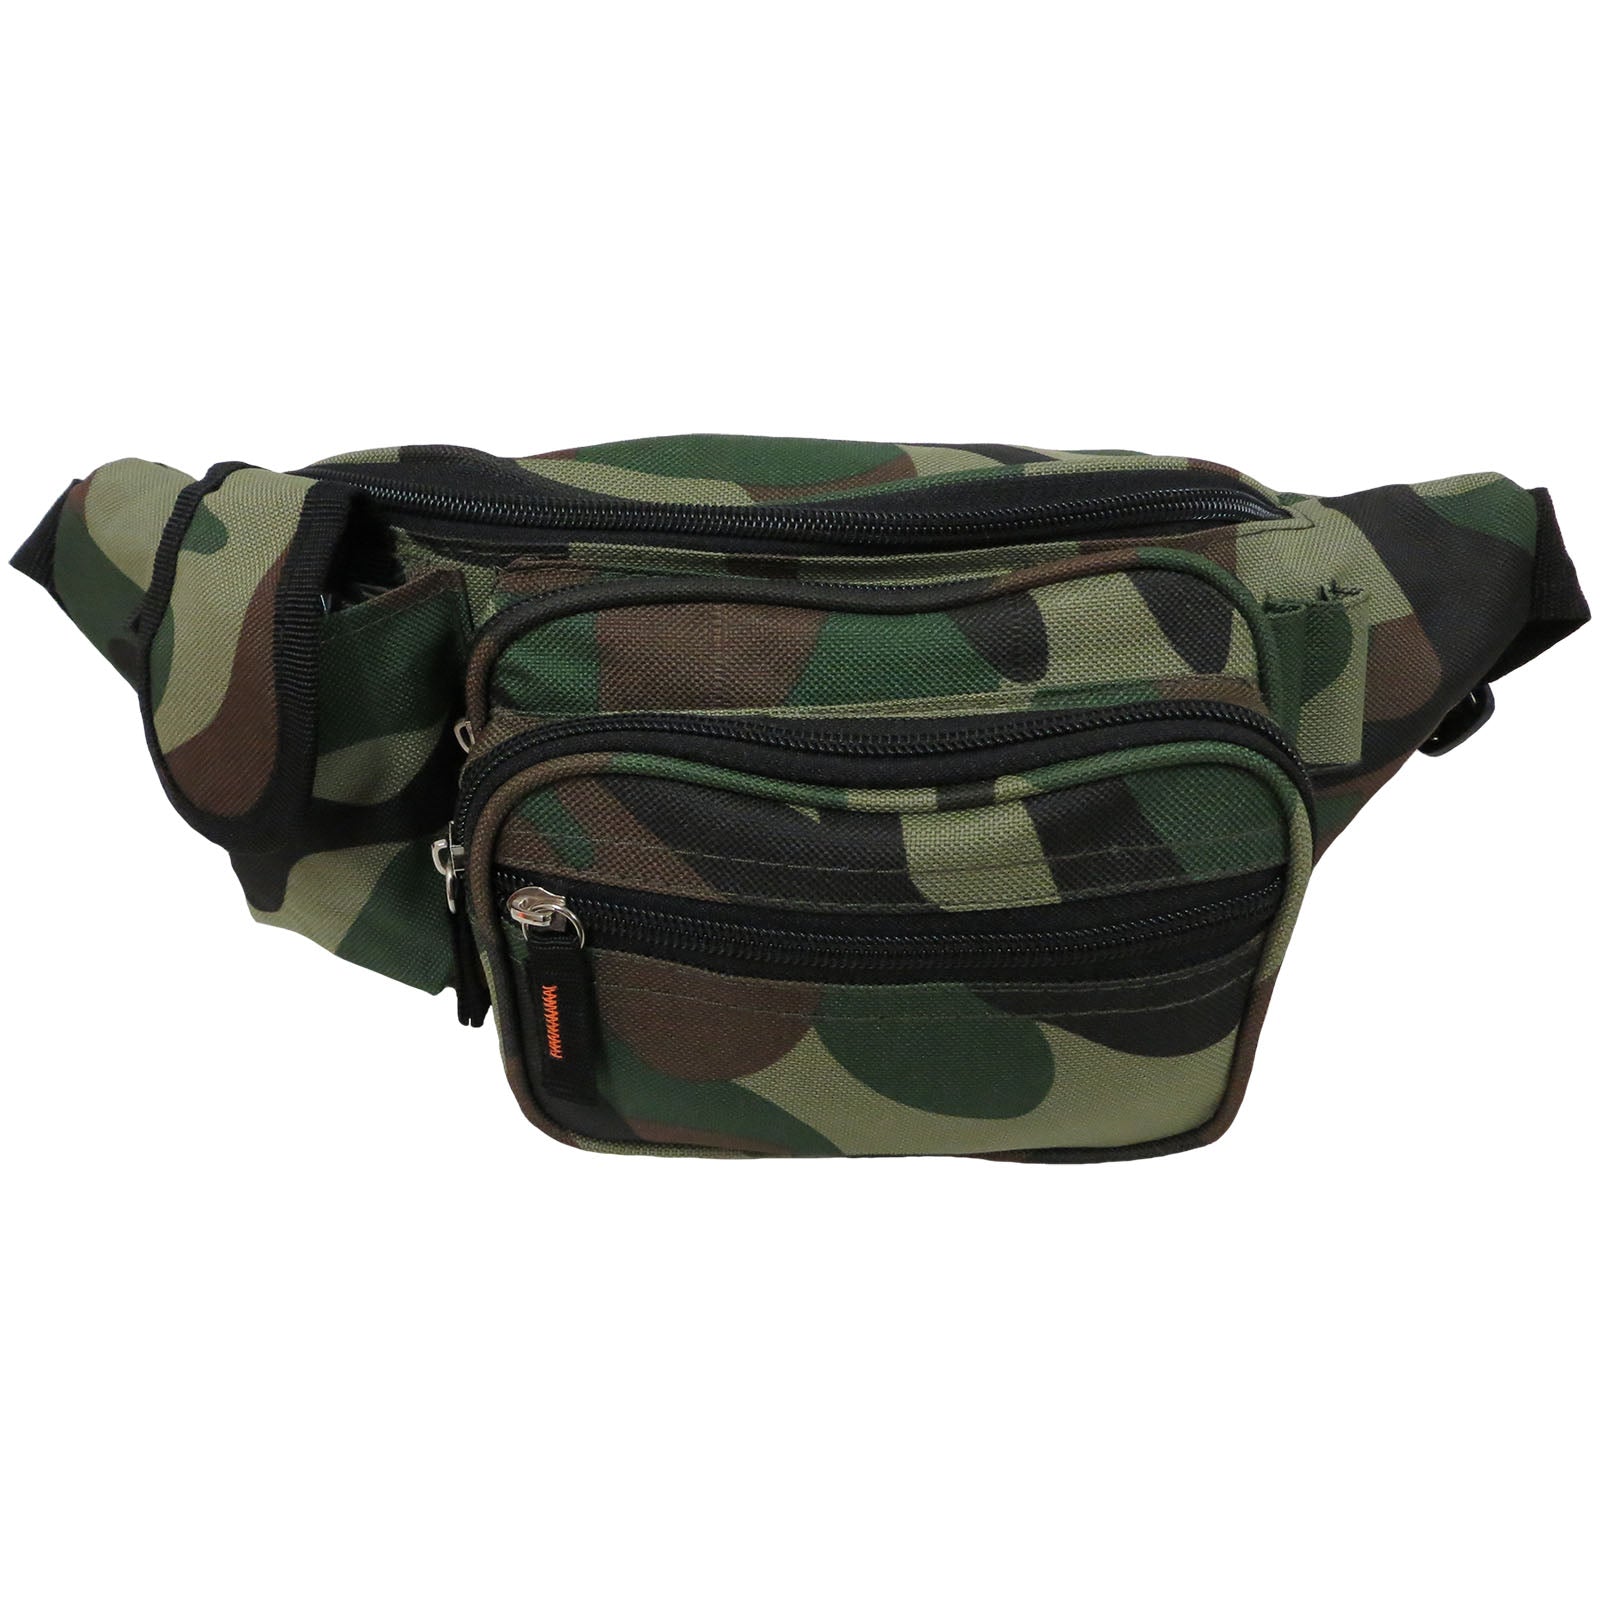 Wholesale Fanny Packs for Men | Fanny Bags in Black, Camouflage & More ...